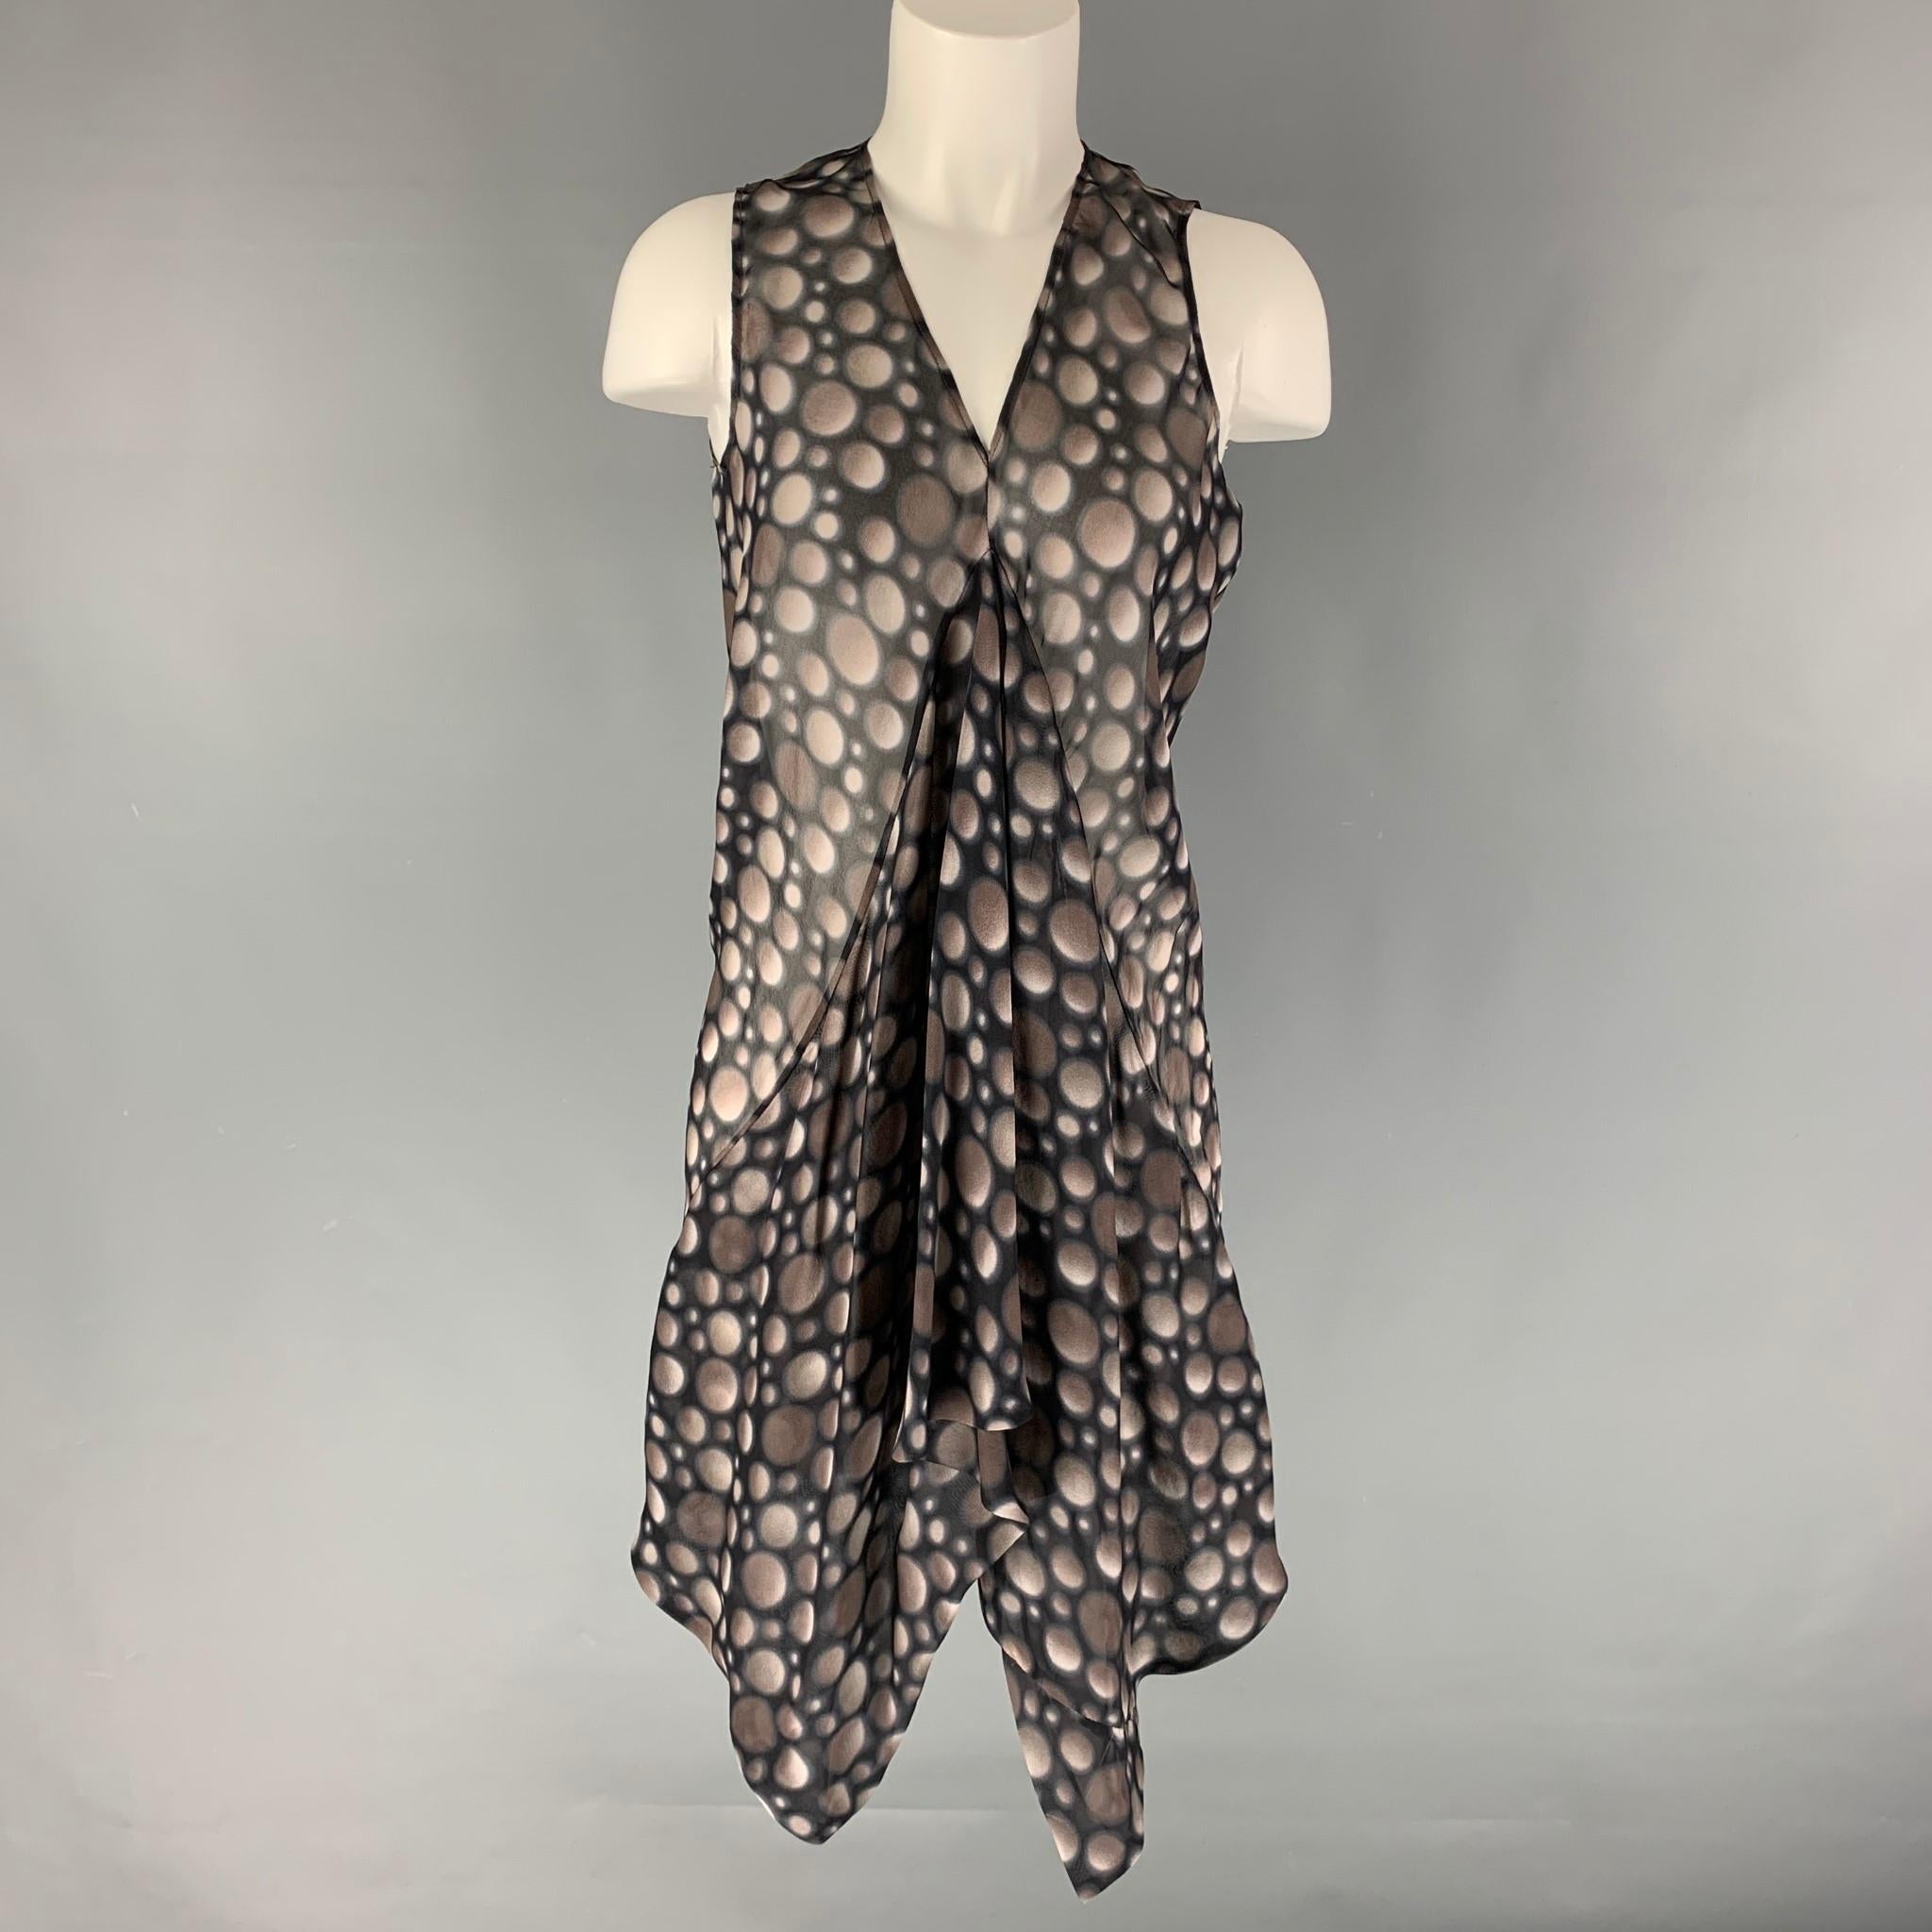 RICK OWENS sleeveless dress comes in a black and taupe dots fluid fabric featuring see through style, asymmetrical hem and v-neck.

Excellent Pre-Owned Condition. Fabric and Size tags removed.
Marked: no size marked

Measurements:

Shoulder: 11.5